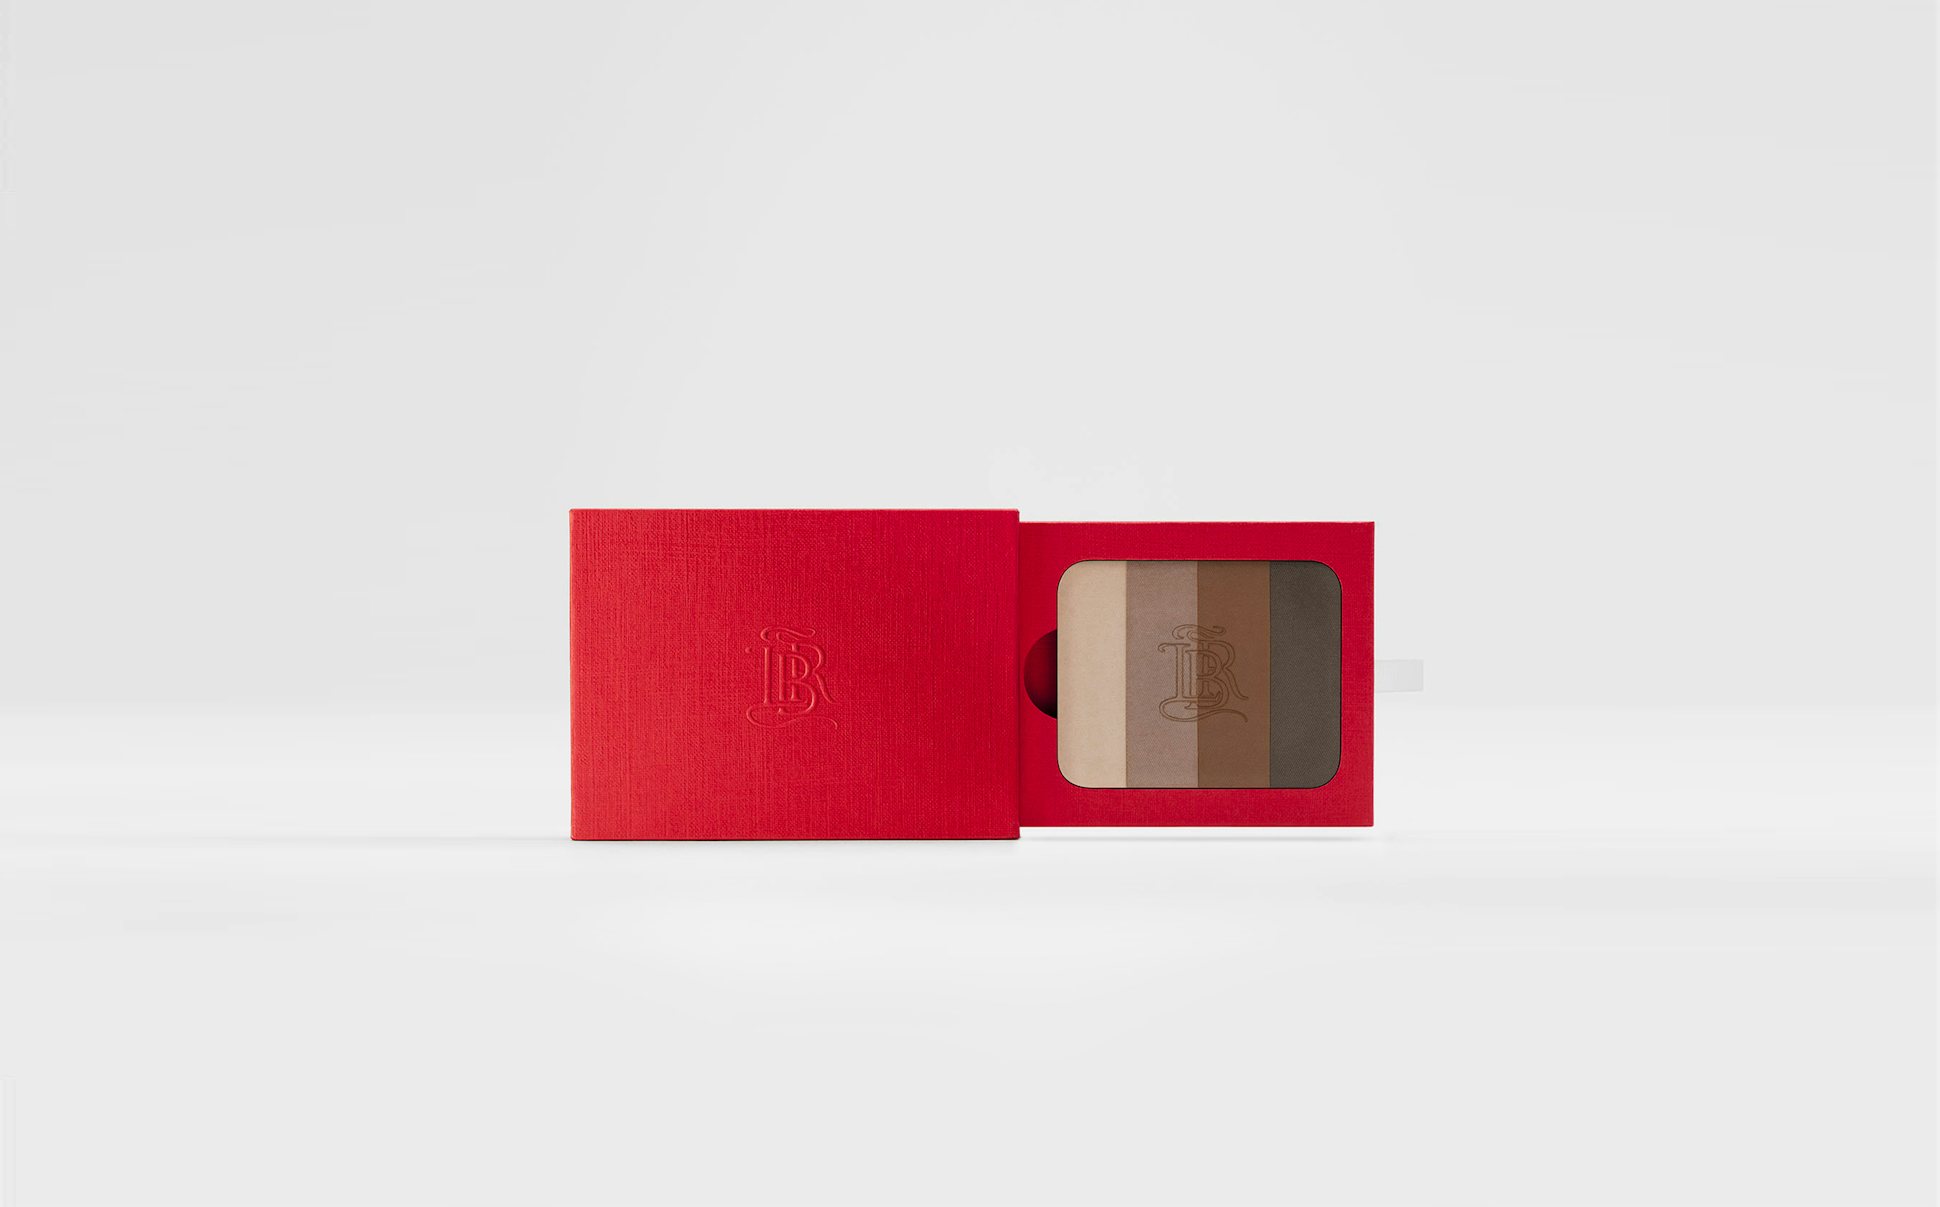 La bouche rouge les Ombres Tage eyeshadow palette in the red paper case